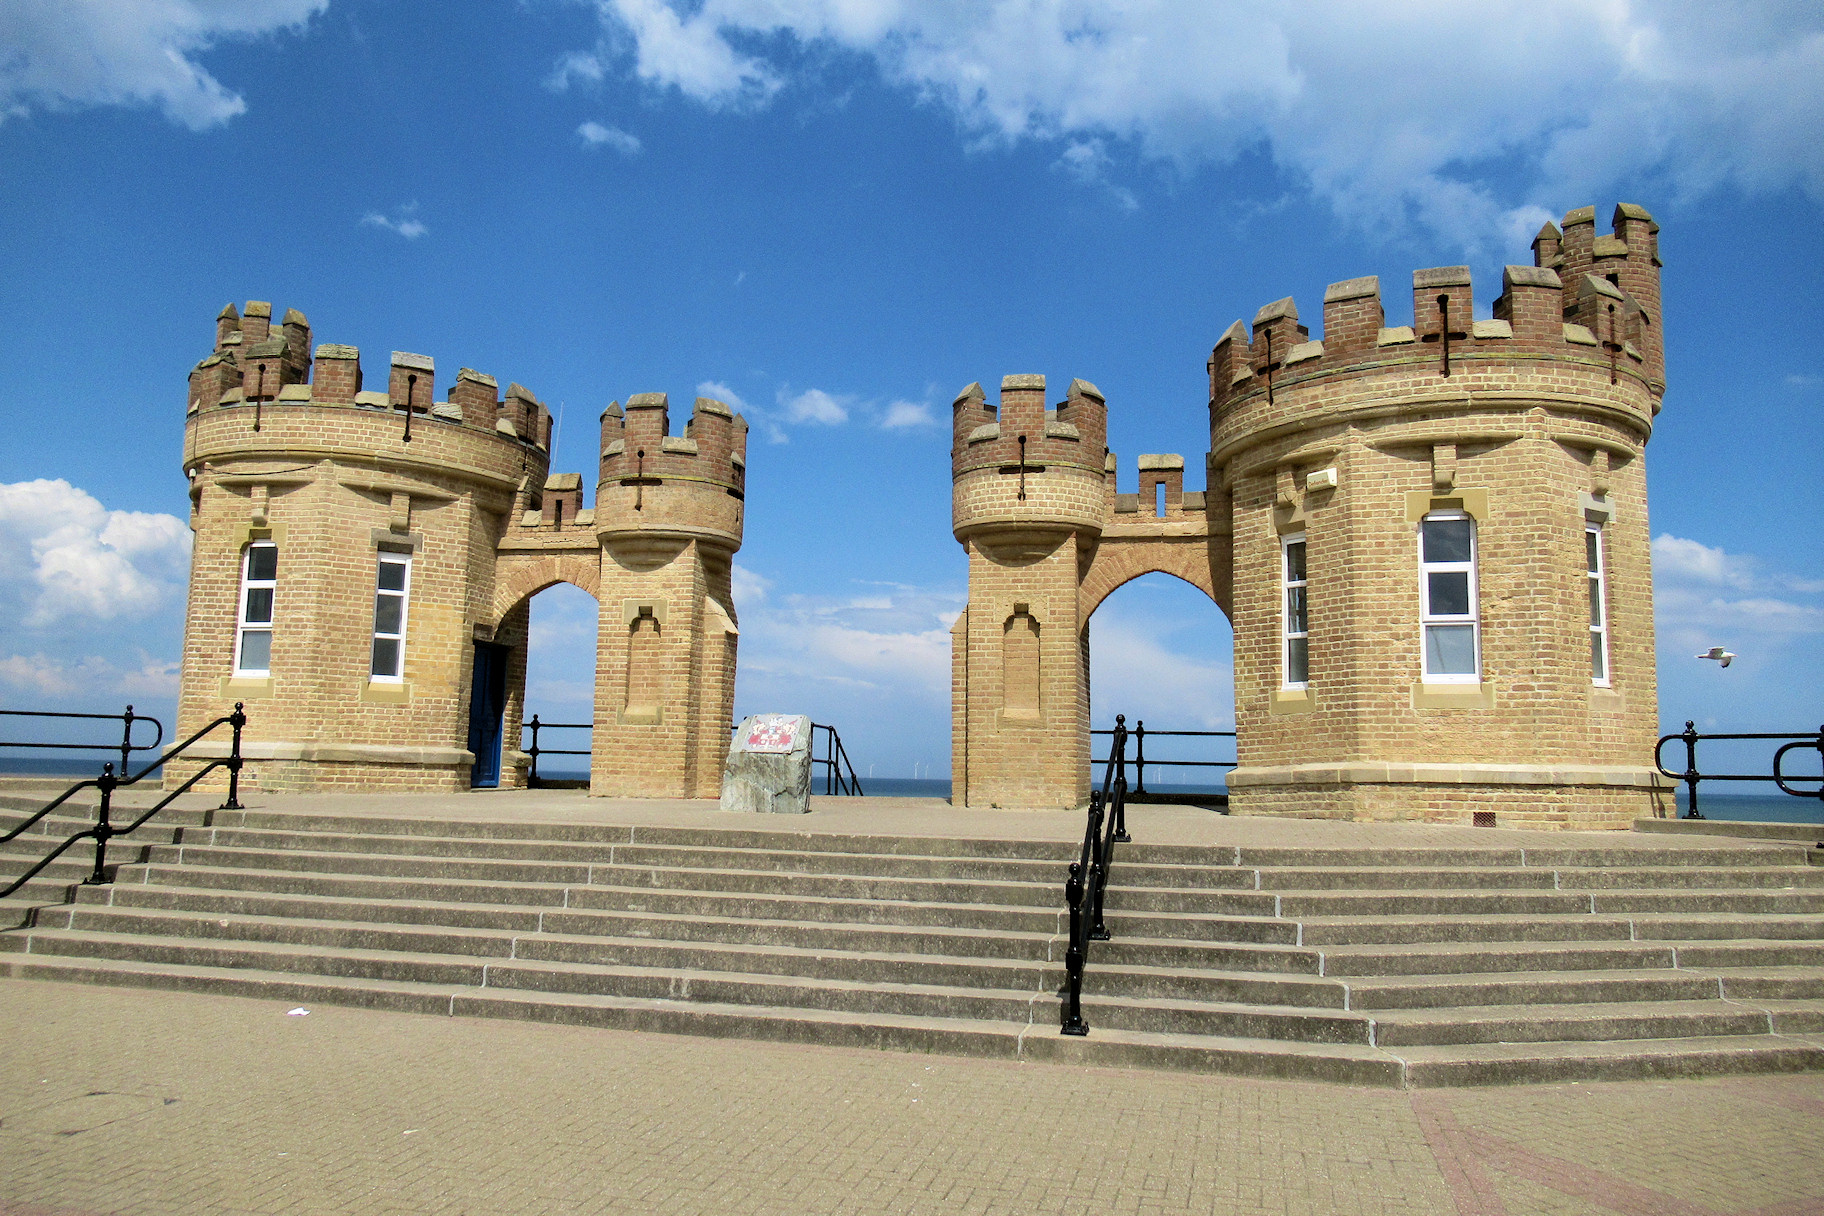 Pier Towers Withernsea